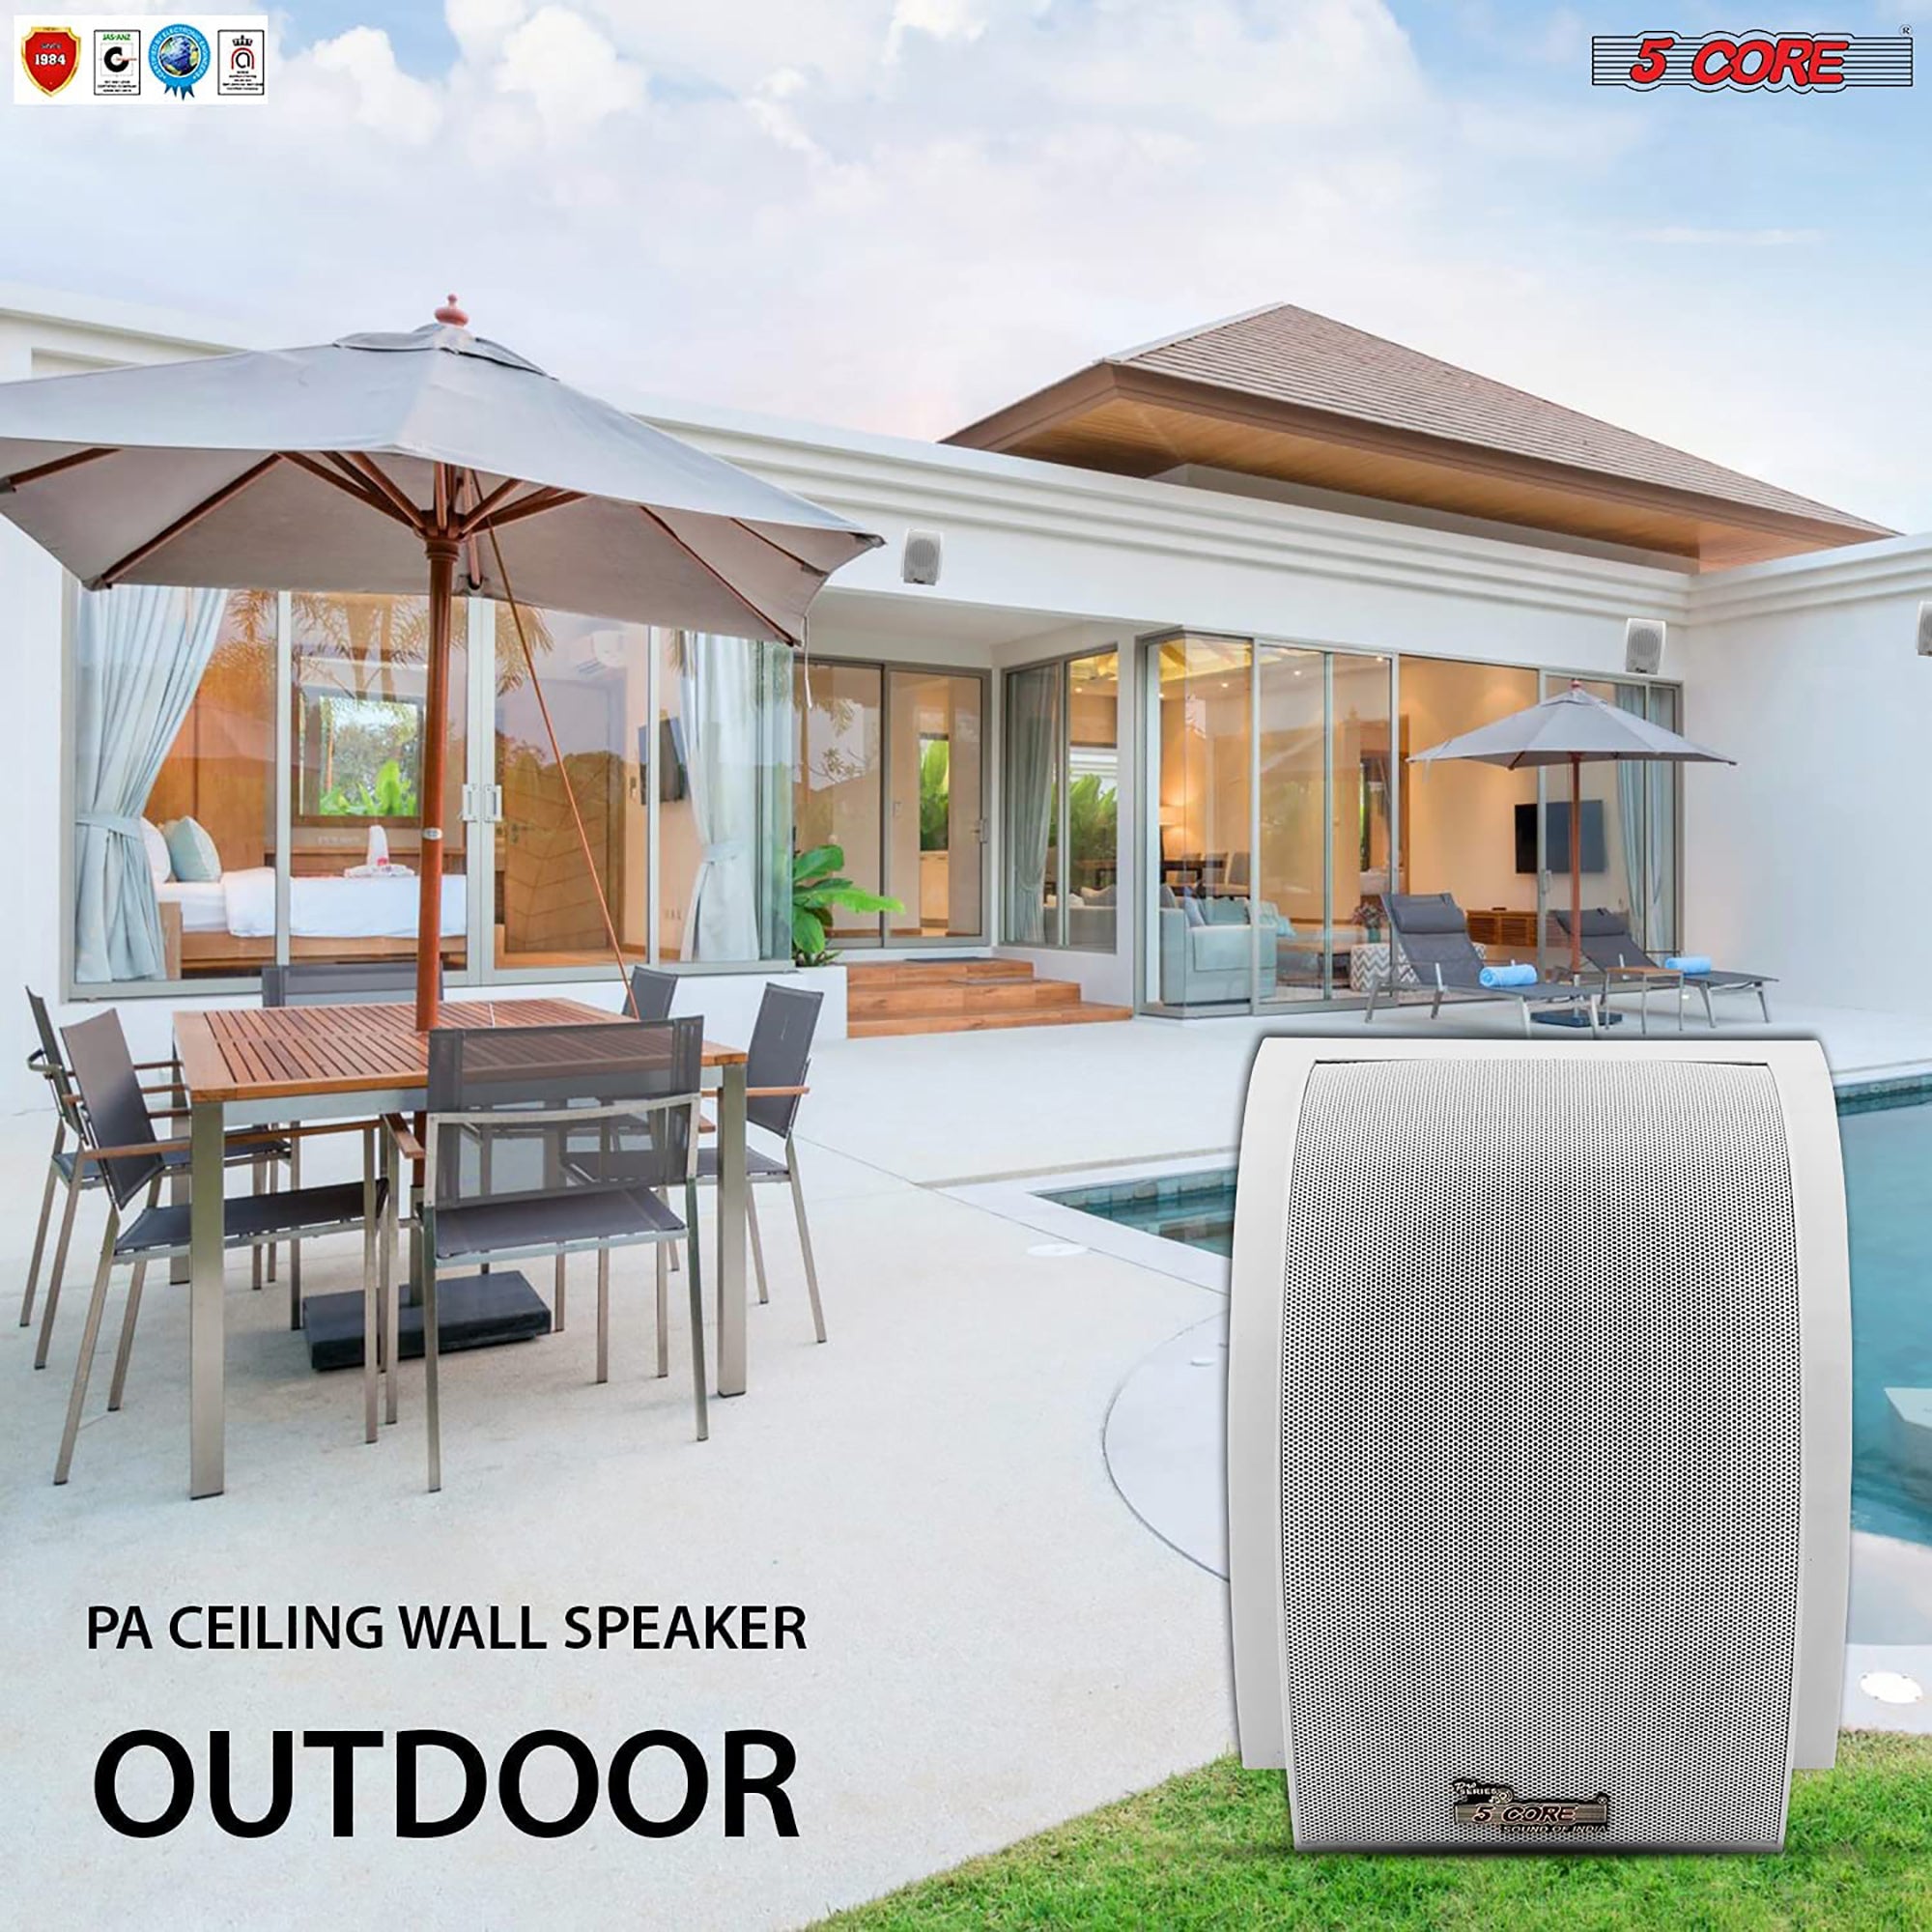 5 Core Wall Speaker 80W Max Power Indoor Outdoor Speakers White High Performance All Weather Wall Mount PA Speaker Wired Entertainment System for Patio Room Garage Restaurant Office - WS-11 5 2PCS